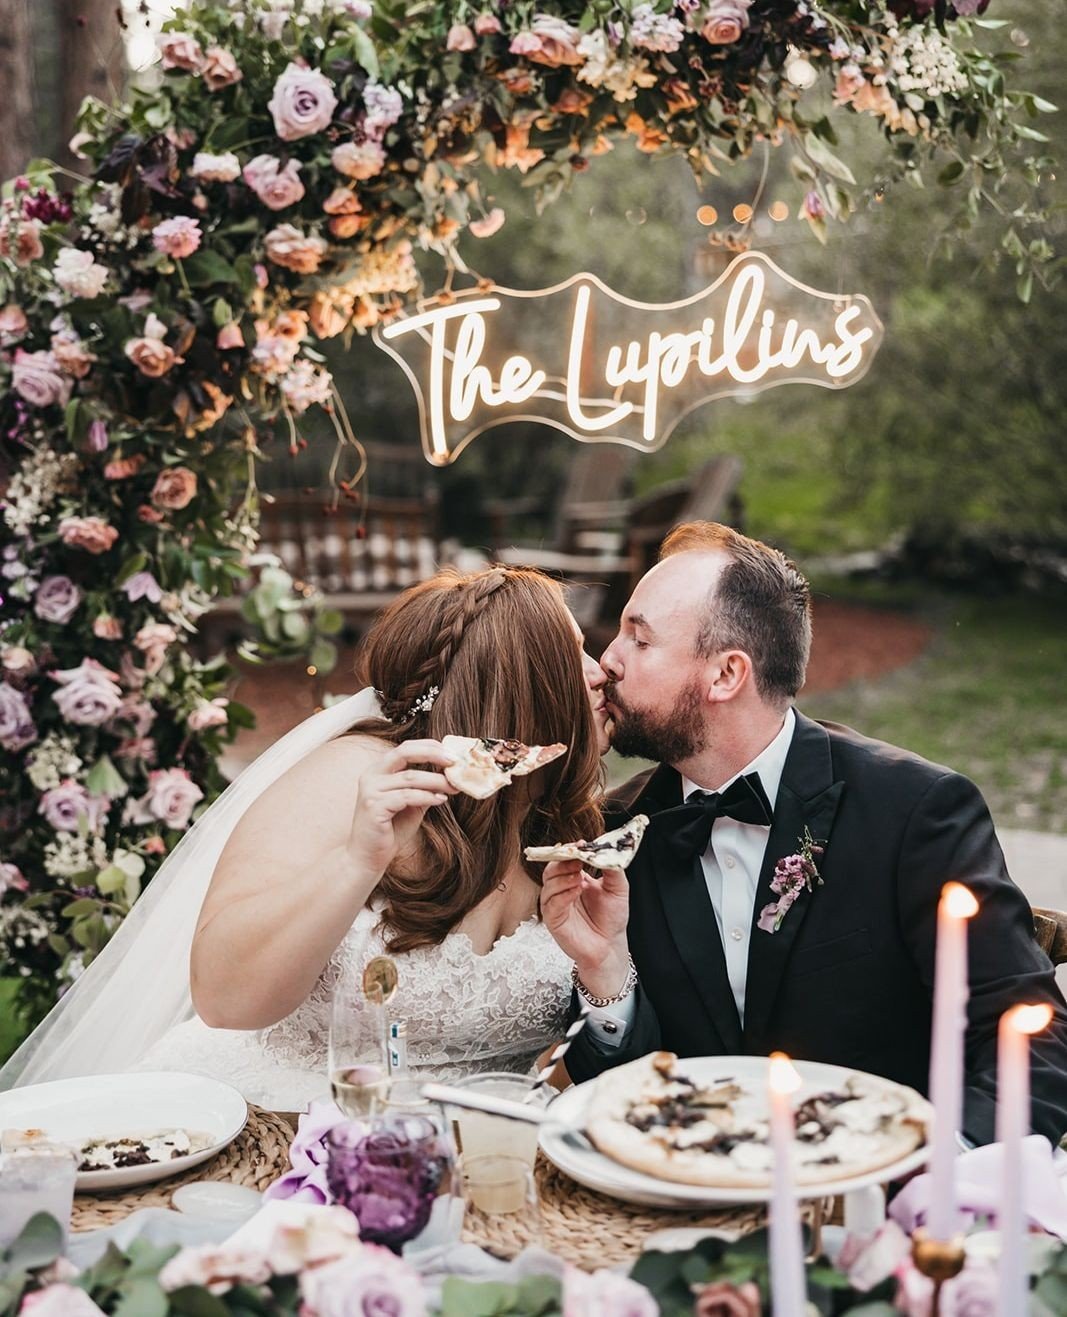 Your wedding is a celebration, and pretty much everyone will look forward to indulging in delicious food. A well-curated menu leaves a lasting impression and becomes a talking point long after the event. Whether it&rsquo;s a gourmet feast or comfort 